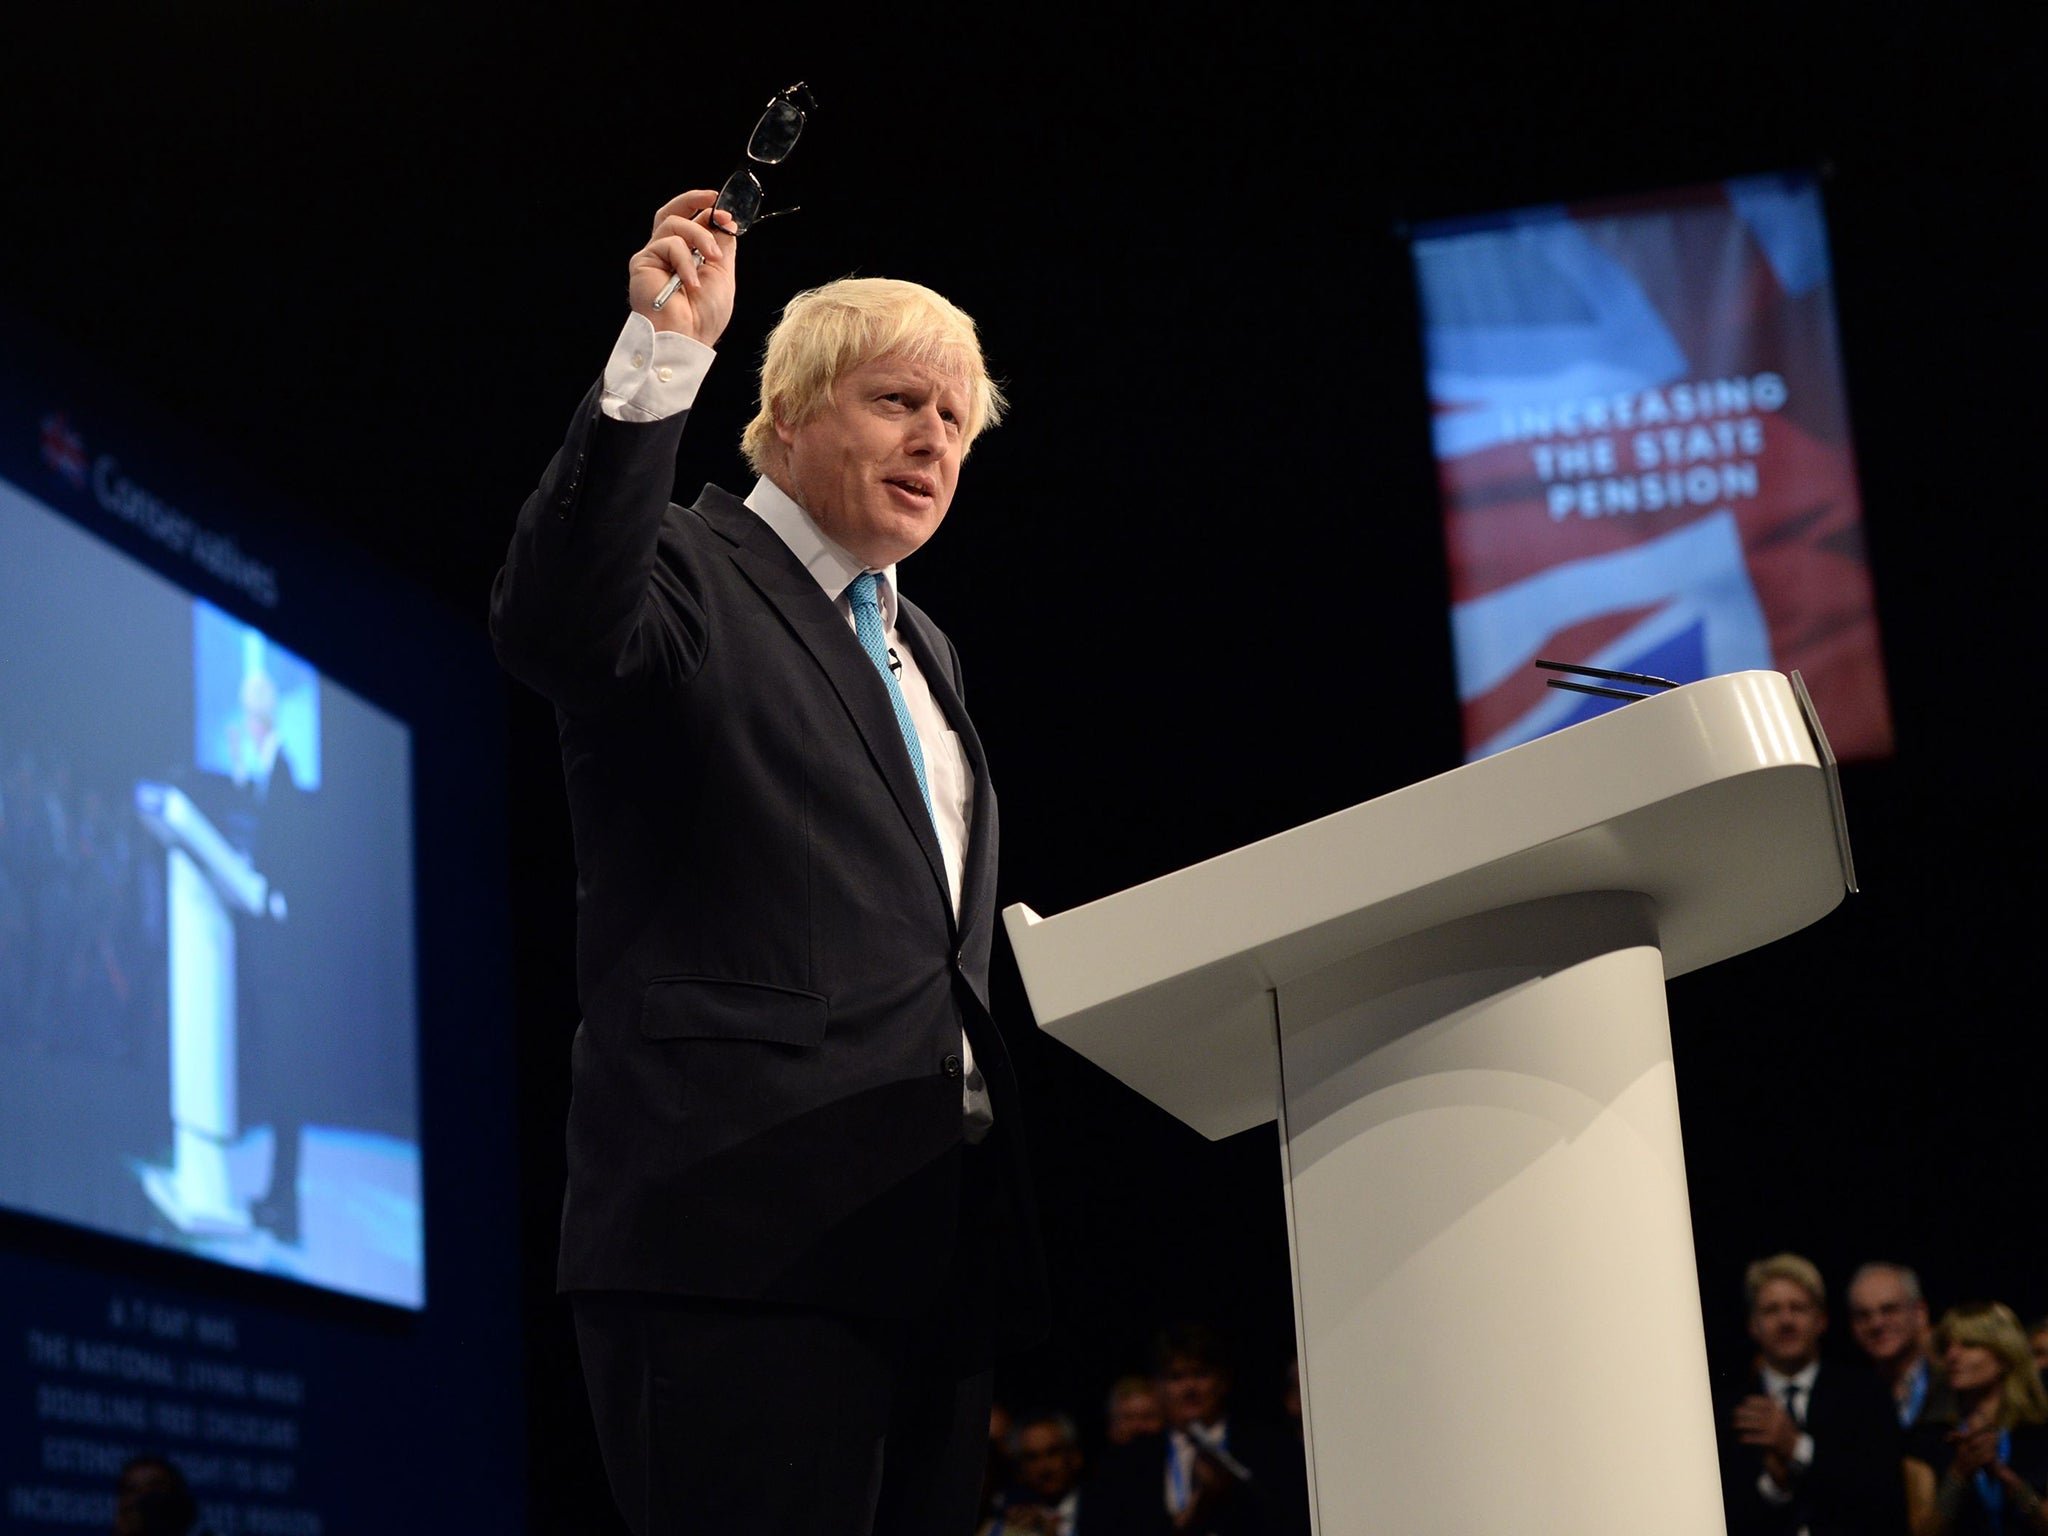 Boris Johnson's speech was greeted by applause, cheers and a standing ovation